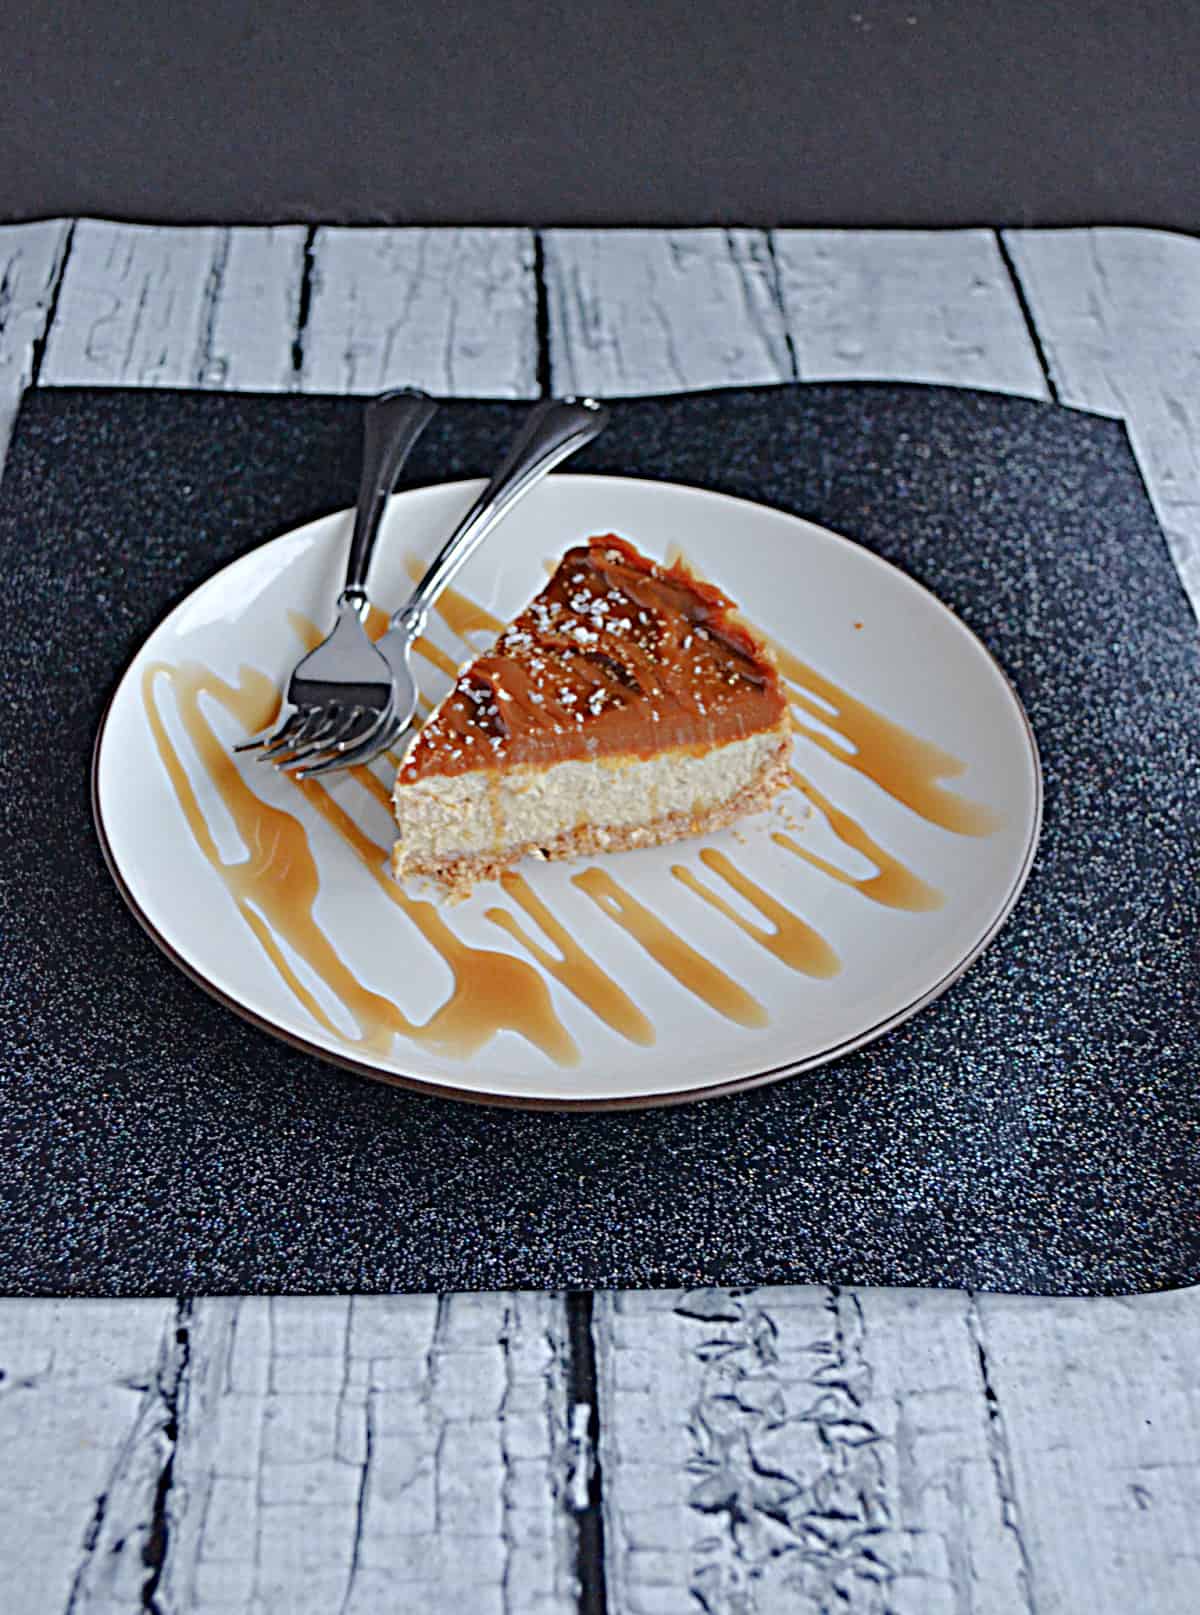 A plate with a slice of Dulce de Leche cheesecake and 2 forks on the plate.